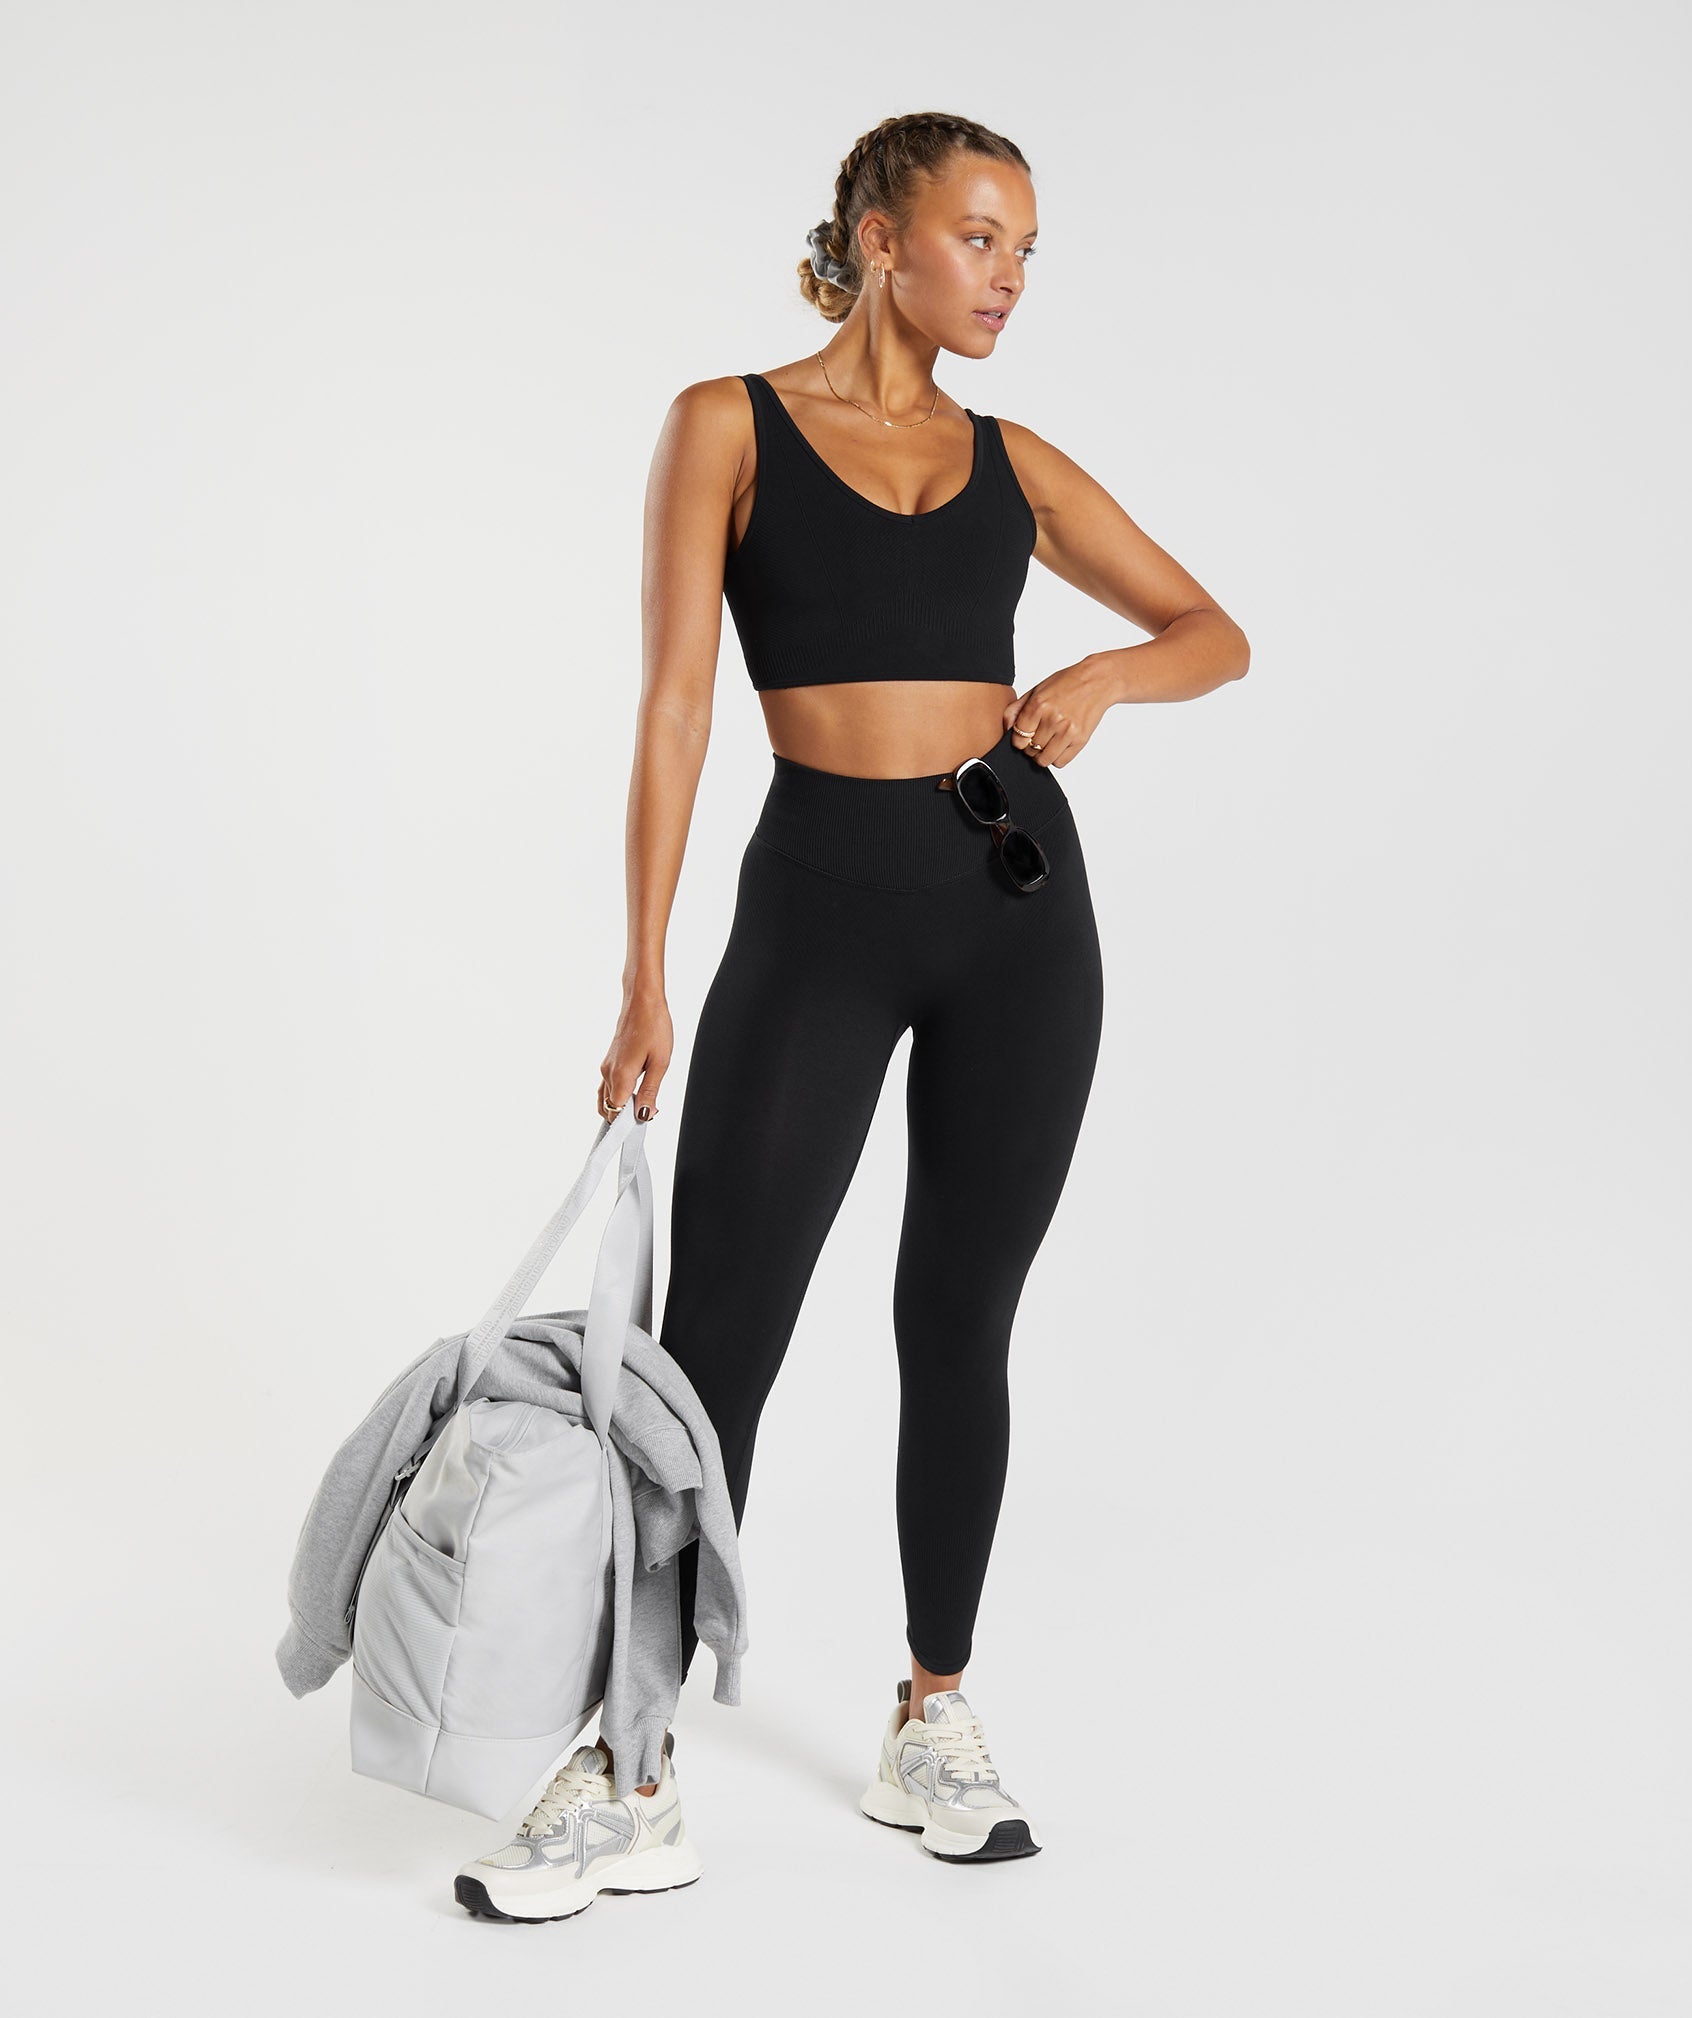 Rest Day Seamless Leggings in Black - view 4